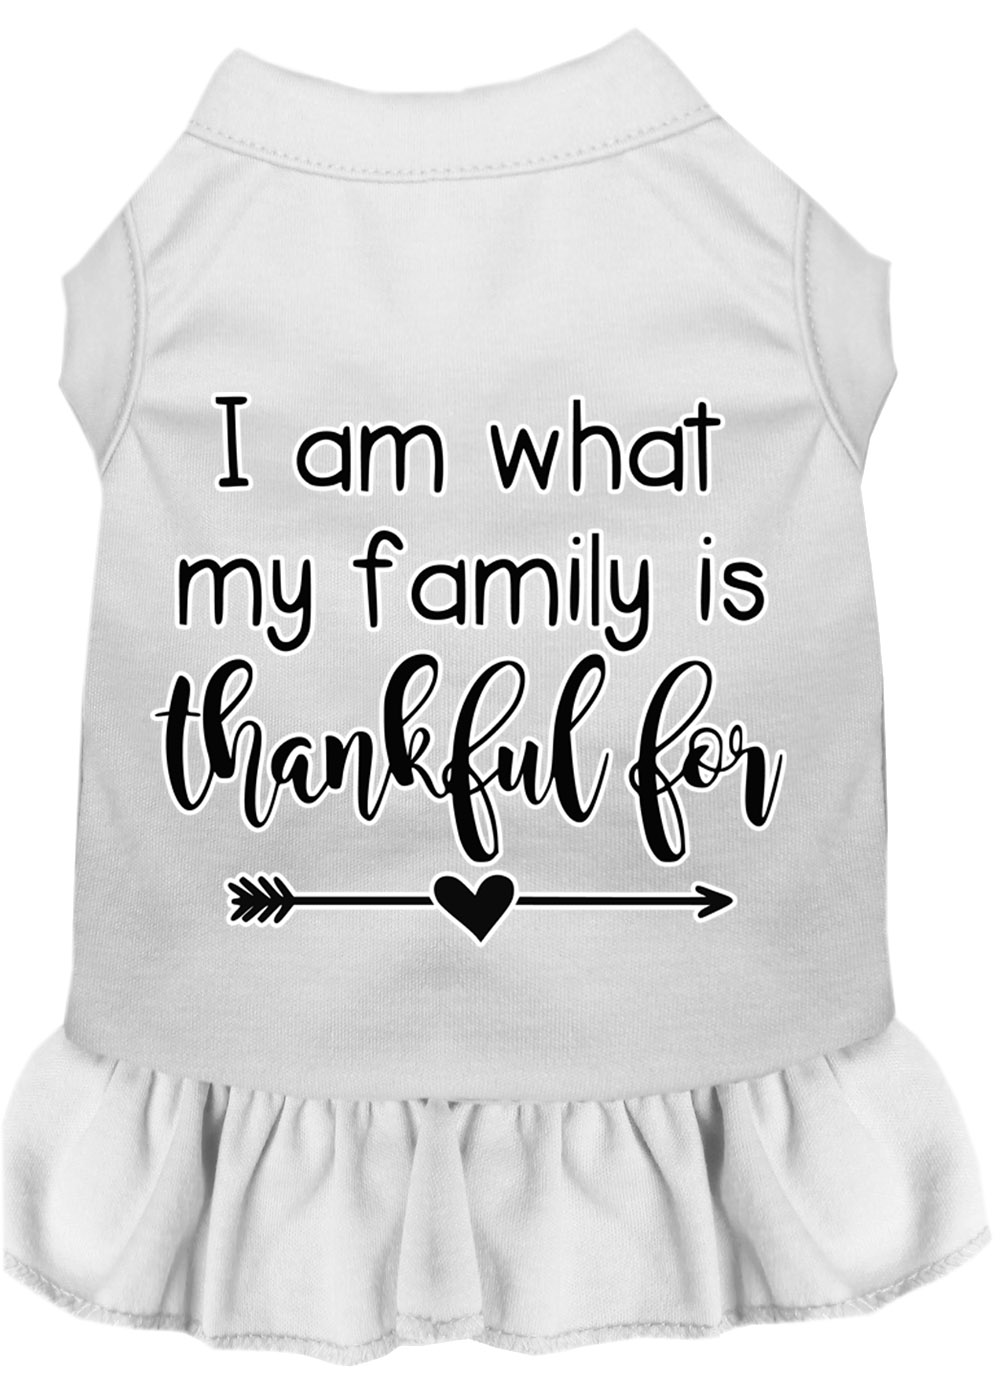 I Am What My Family is Thankful For Screen Print Dog Dress White Sm